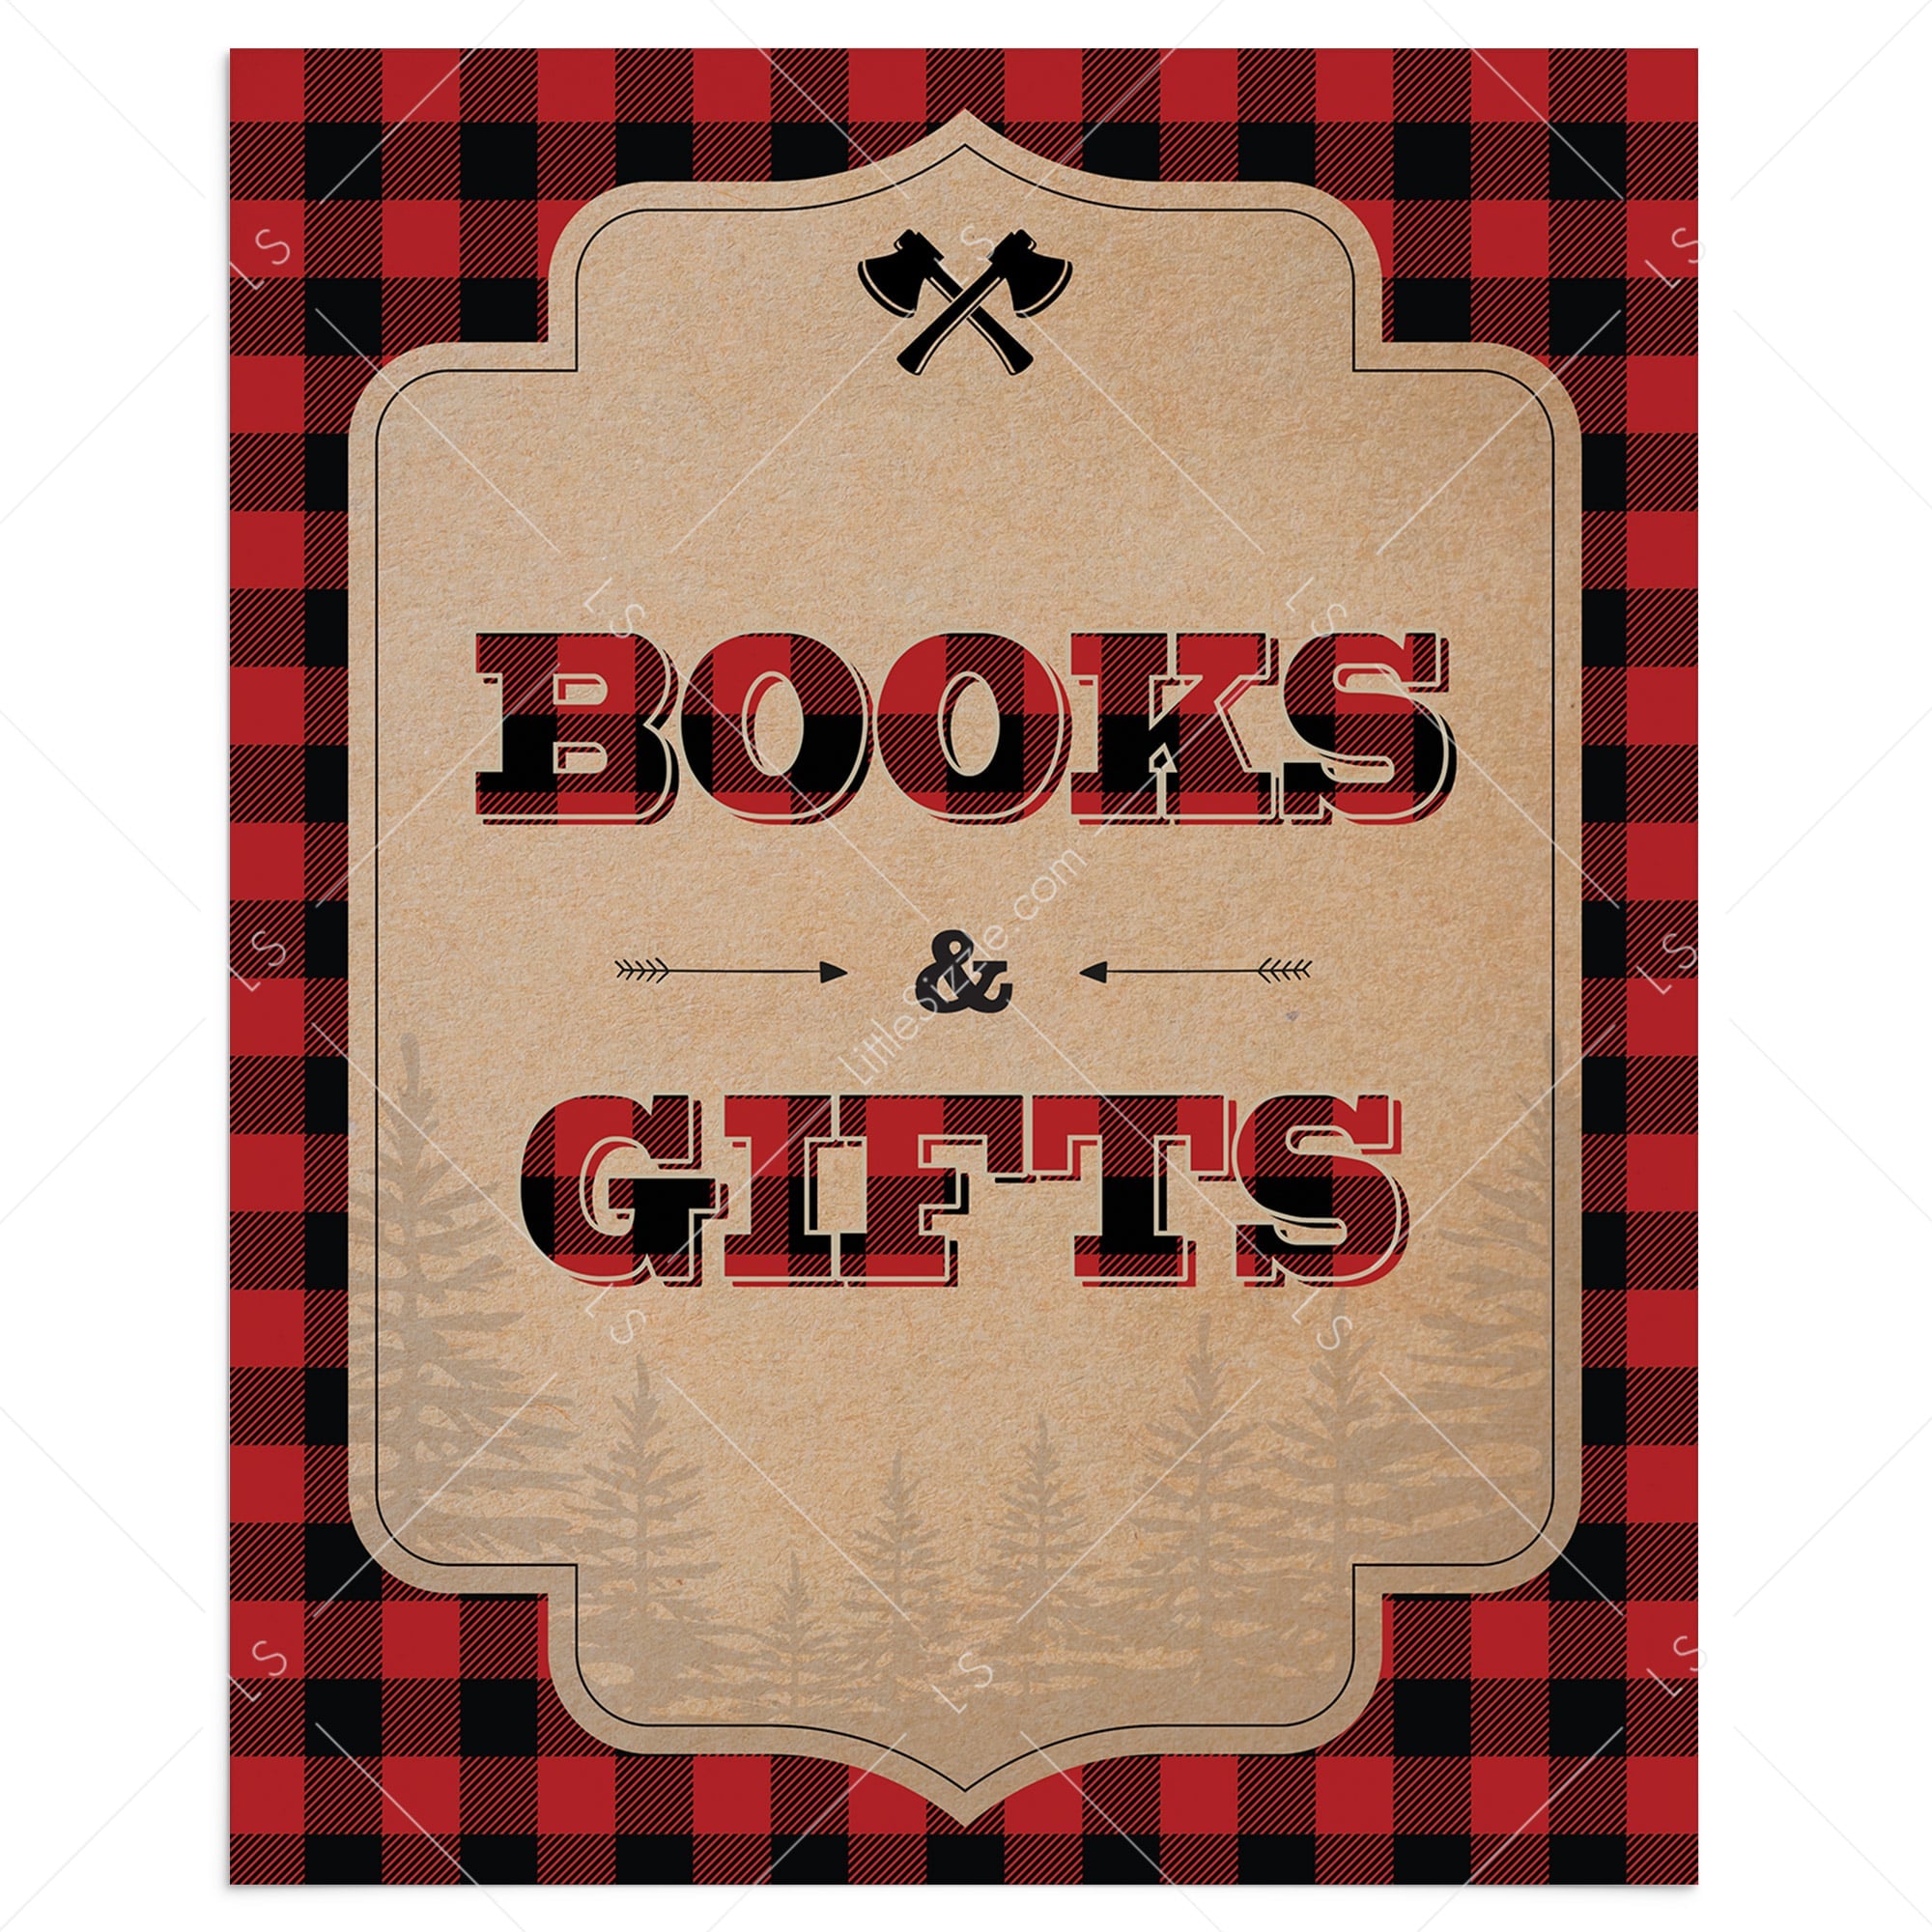 Books and gifts table sign for rustic baby shower by LittleSizzle